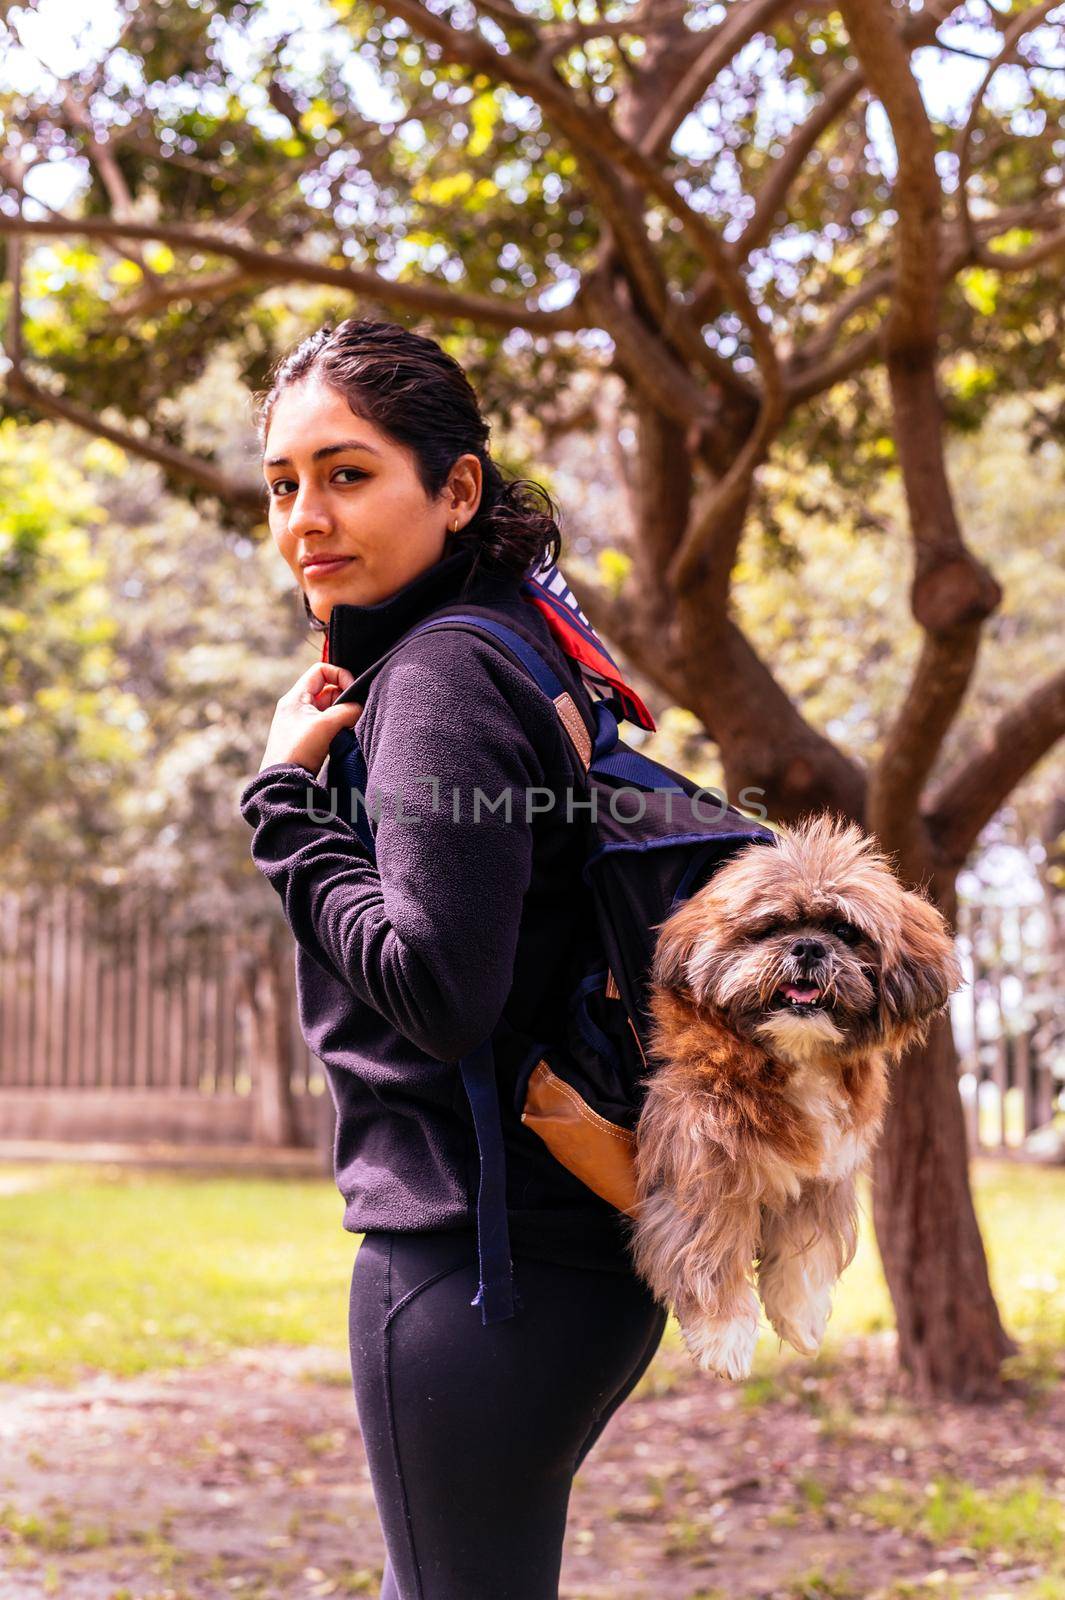 A charming young woman walks in nature, with a backpack on her shoulder, from which her dog peeks out. by Peruphotoart